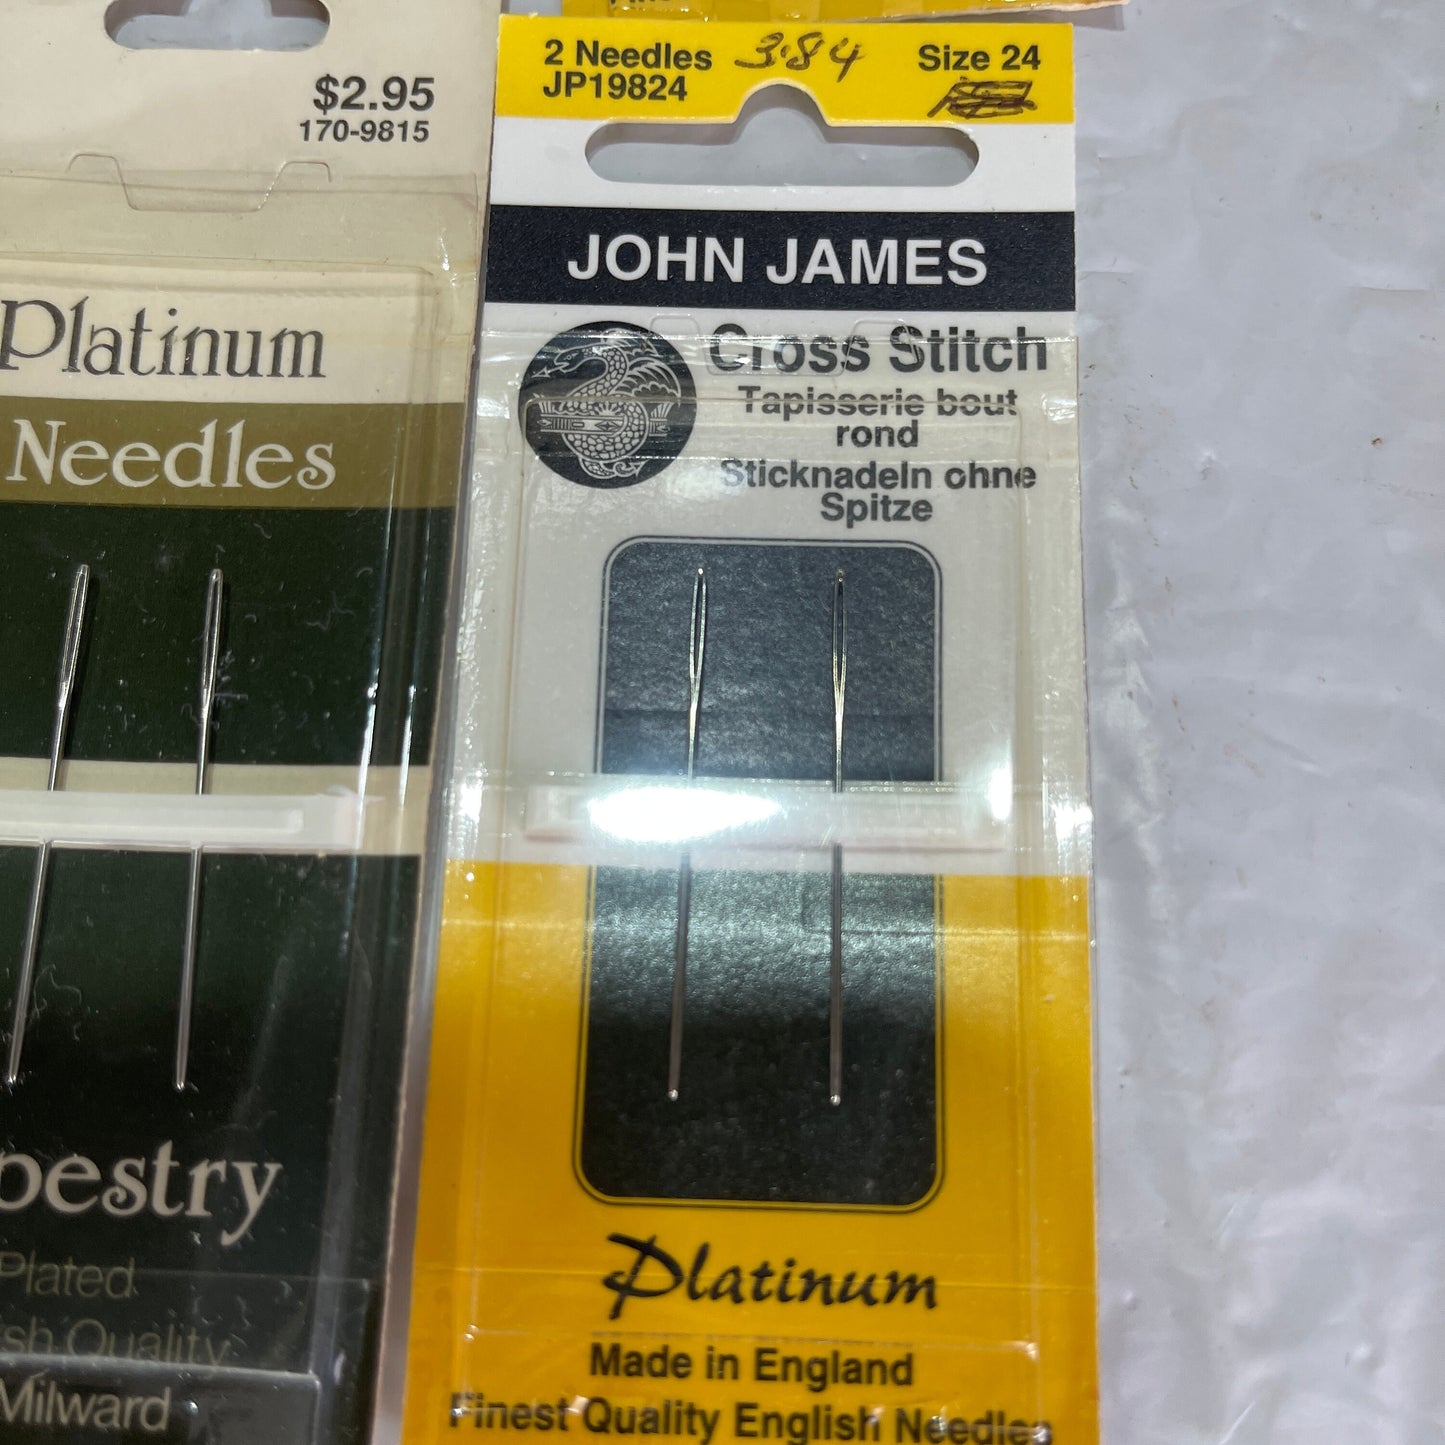 John James Cross Stitch & Millward Tapestry Needles Set Of 4 Packs See Pictures and Description For Details*